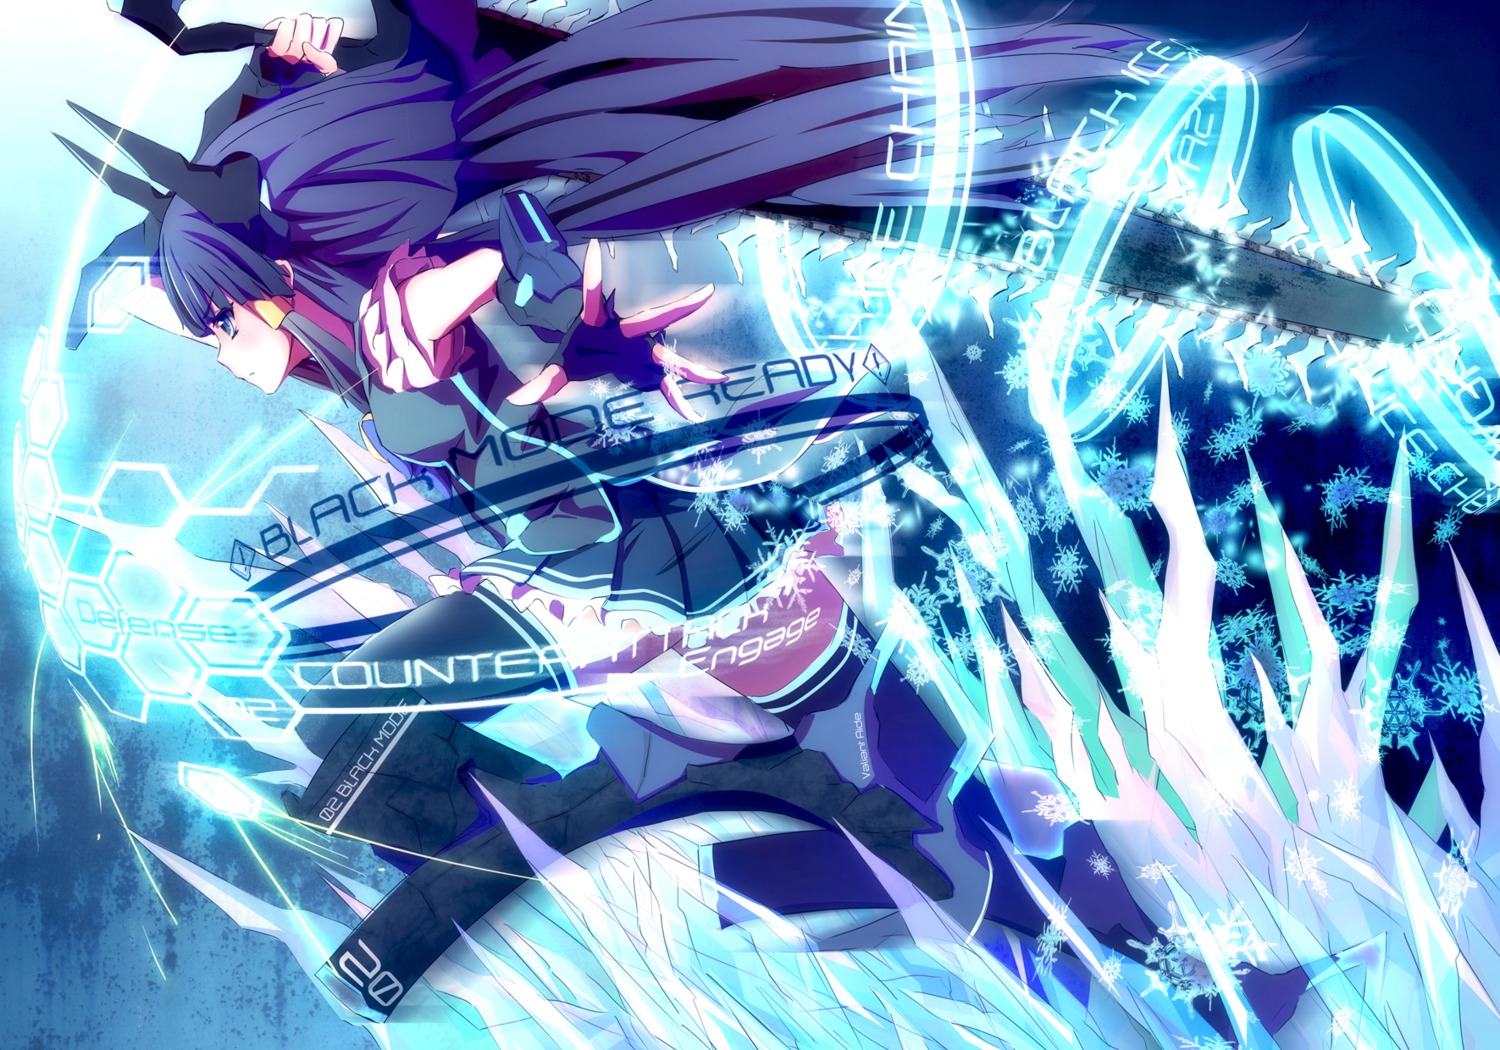 aoki_reika black_rock_shooter cosplay crossover meron_to_maria pretty_cure smile_precure! sword thighhighs vocaloid